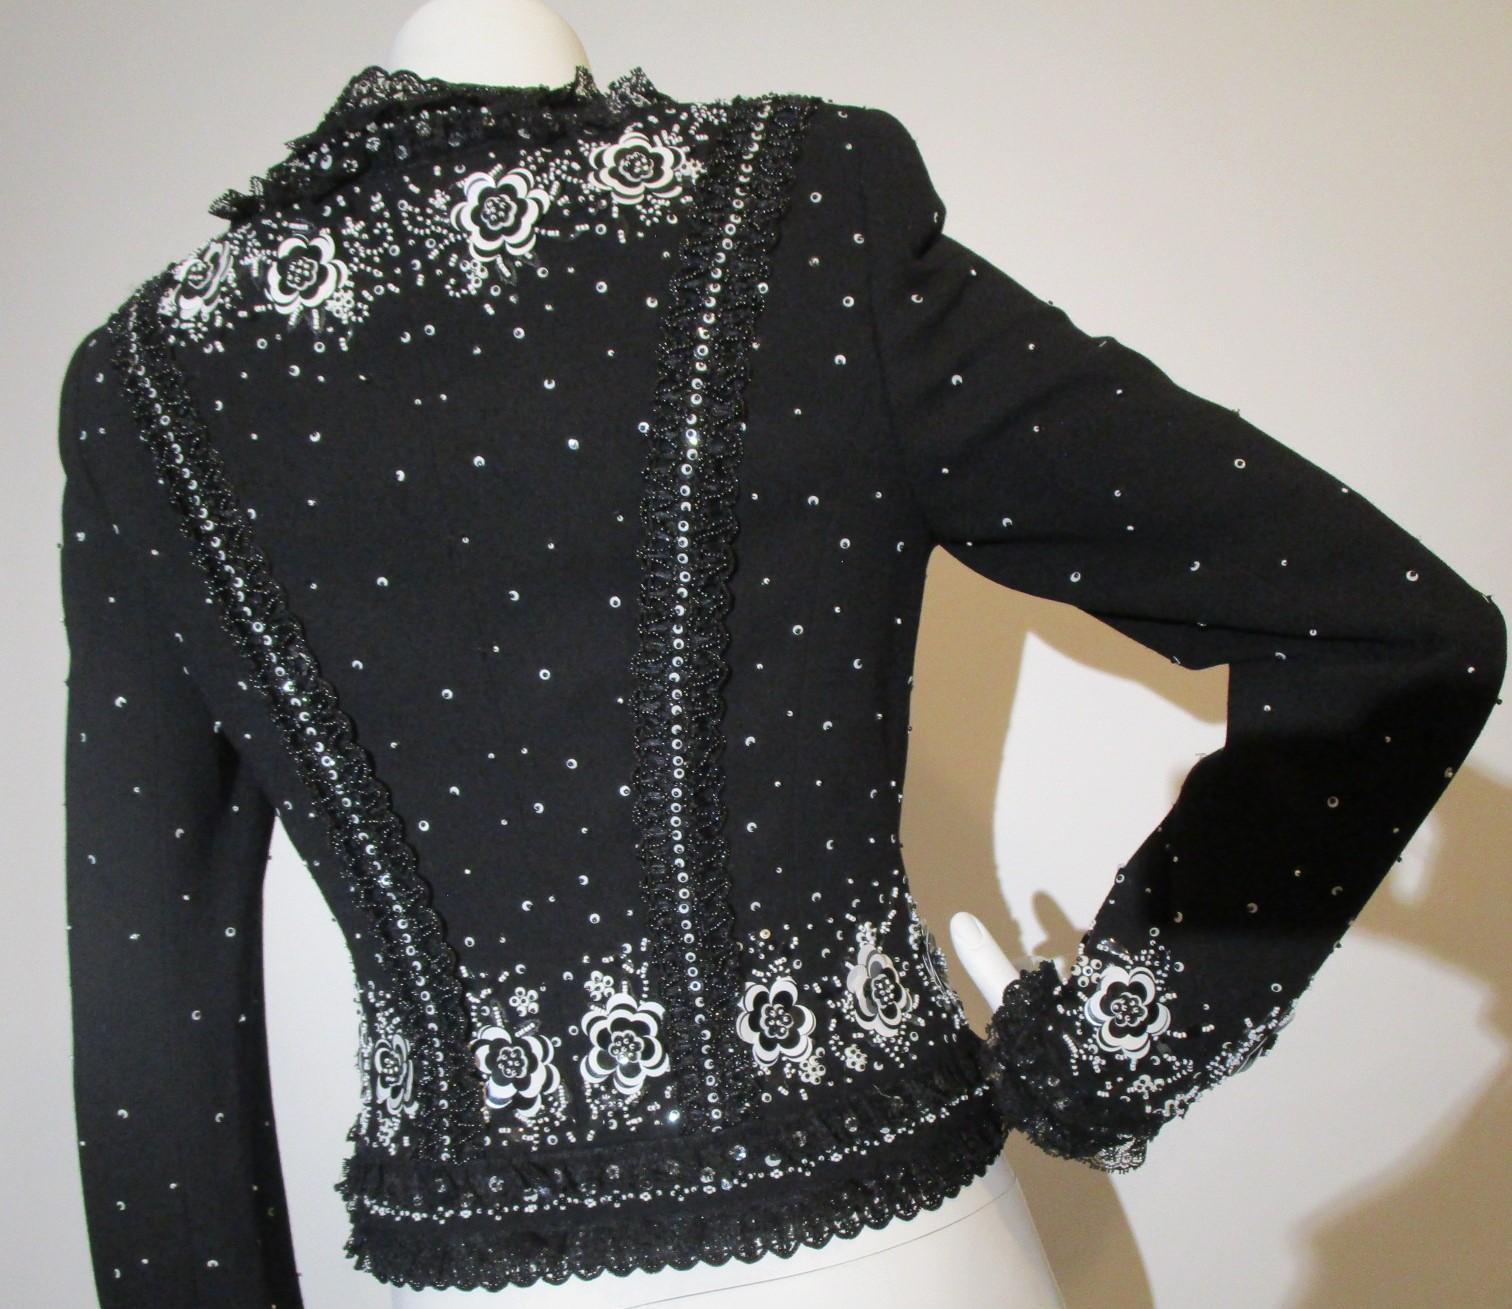 1990s ESCADA Couture Jacket Black & White Beaded Sequin Lace Sz 36 For Sale 5